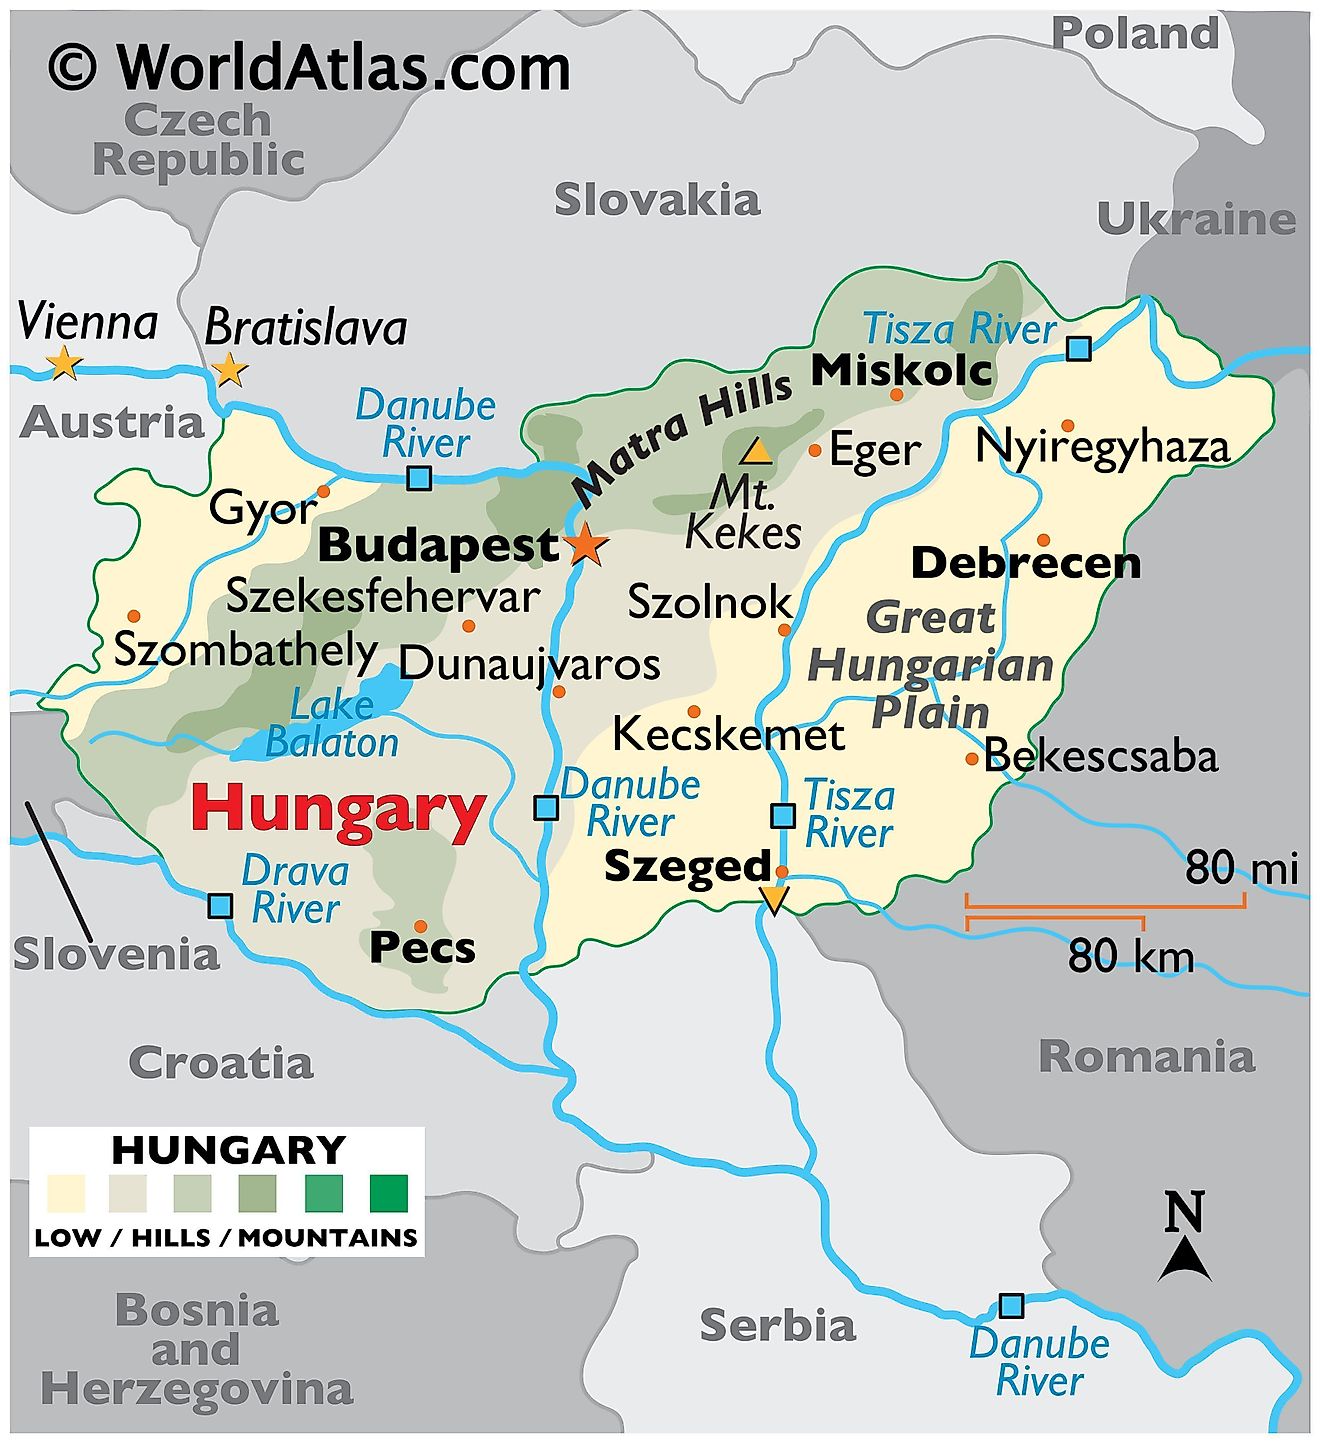 Physical Map of Hungary showing terrain, mountains, extreme points, major rivers, Lake Balaton, important cities, international boundaries, etc.